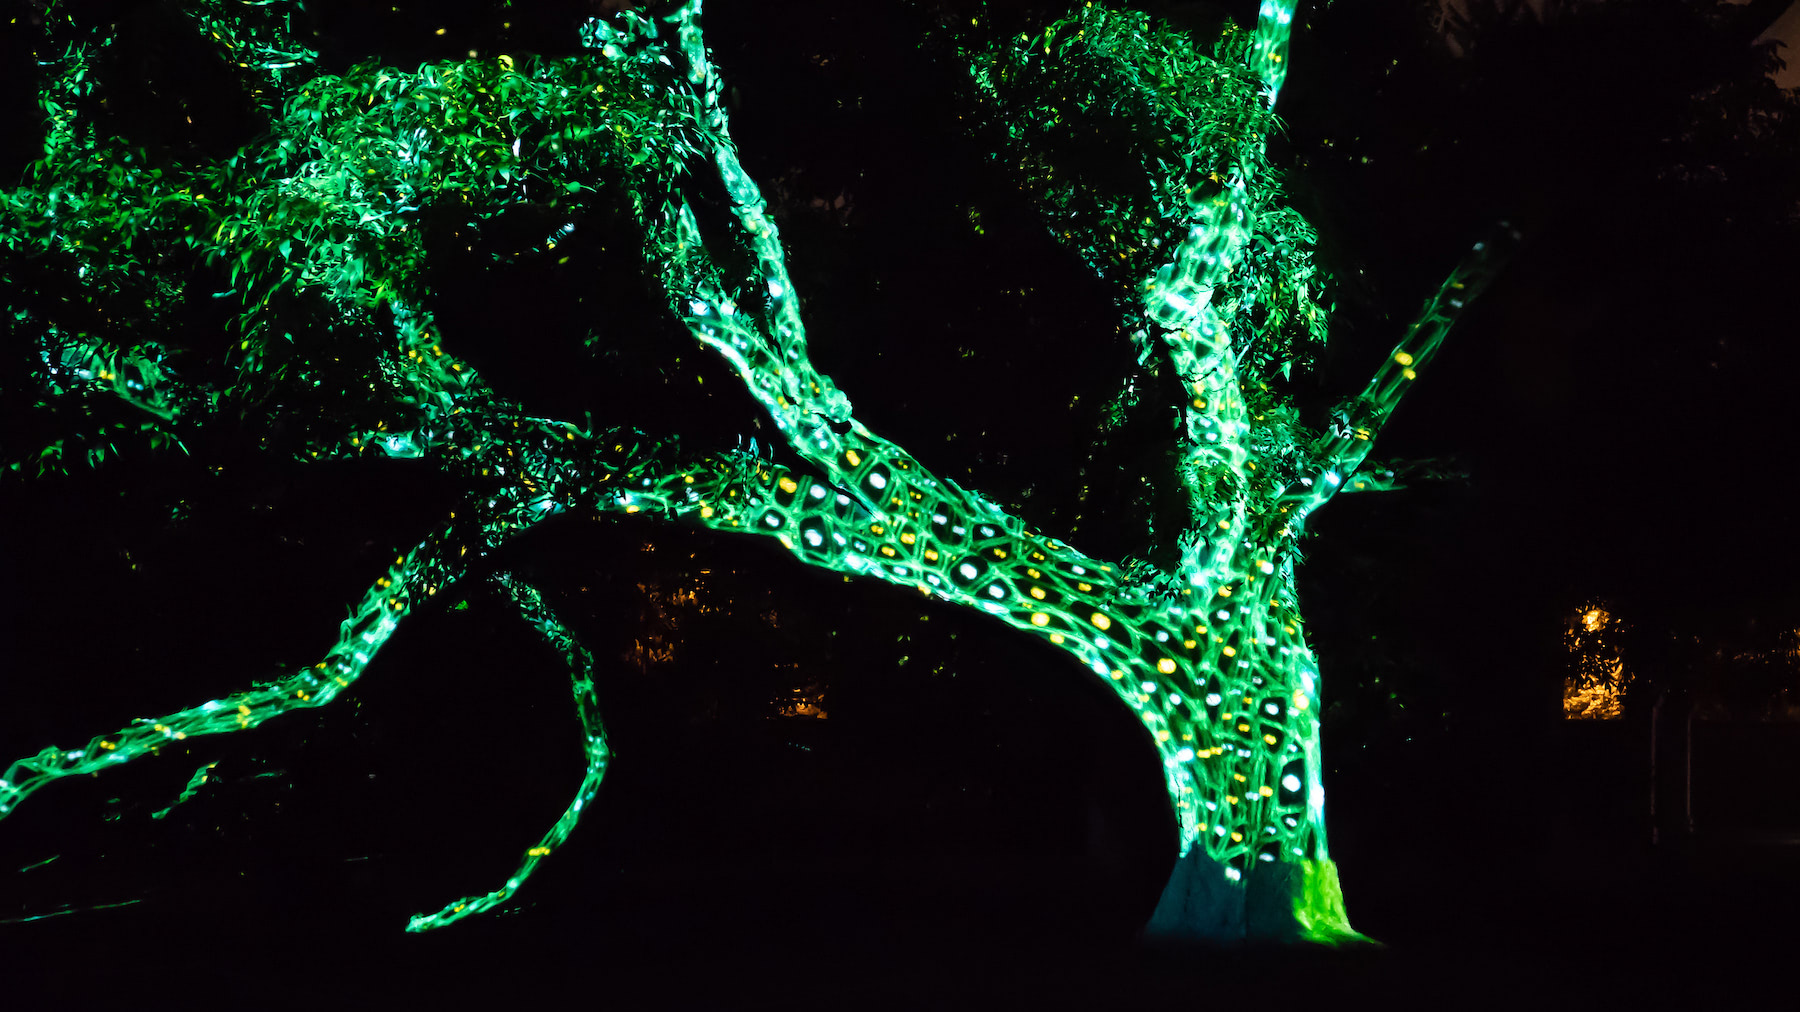 Light projection technology integrated by AVI Systems displays on a tree at Missouri Botanical Garden | AVI Systems